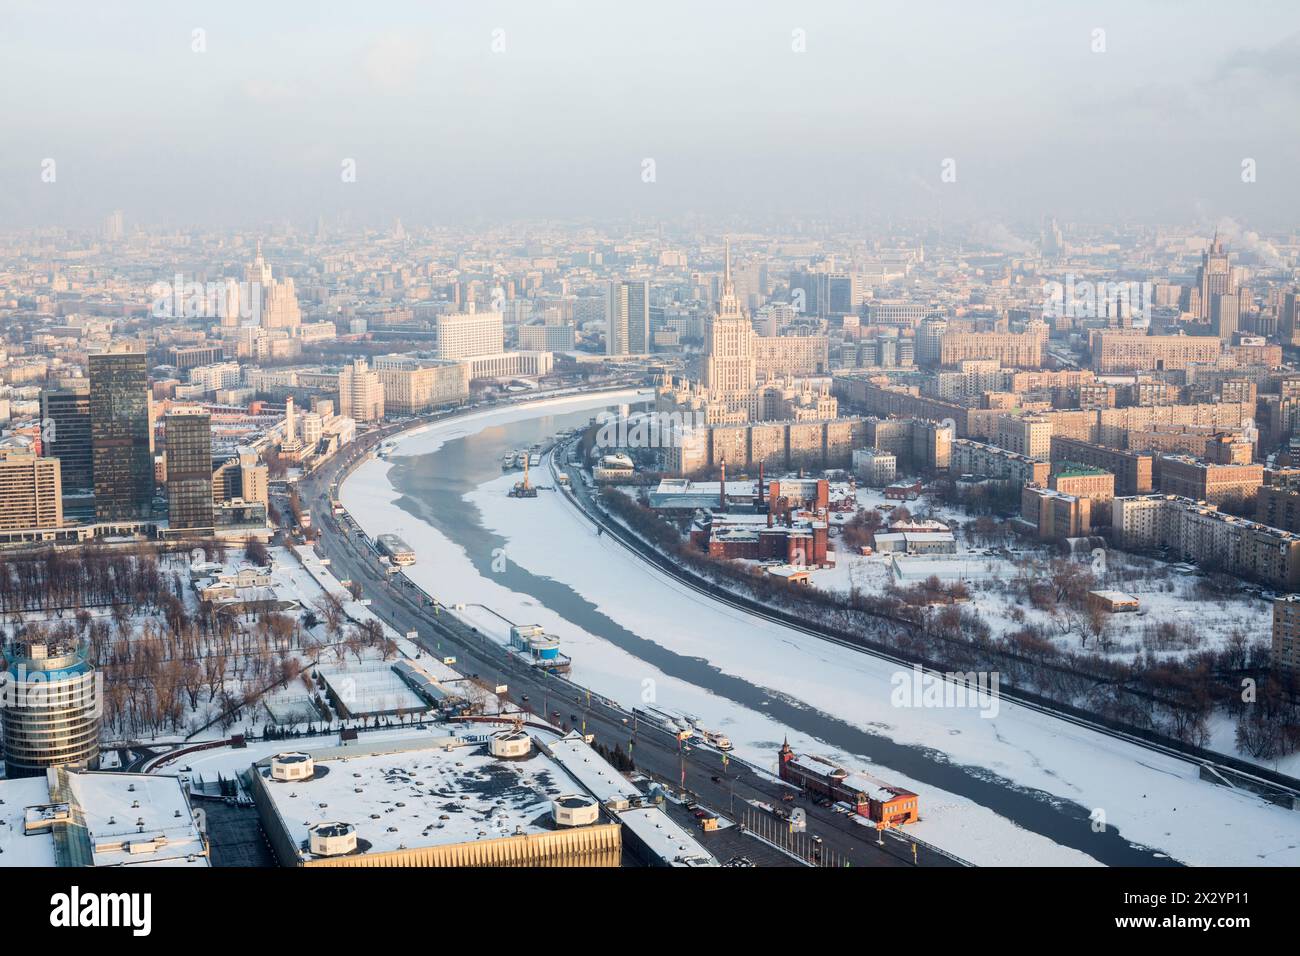 MOSCOW - JAN 2: View from Moscow City on the landscape with White House, Hotel Ukraine, Foreign Office and Moscow River on Presnensky district in the Stock Photo